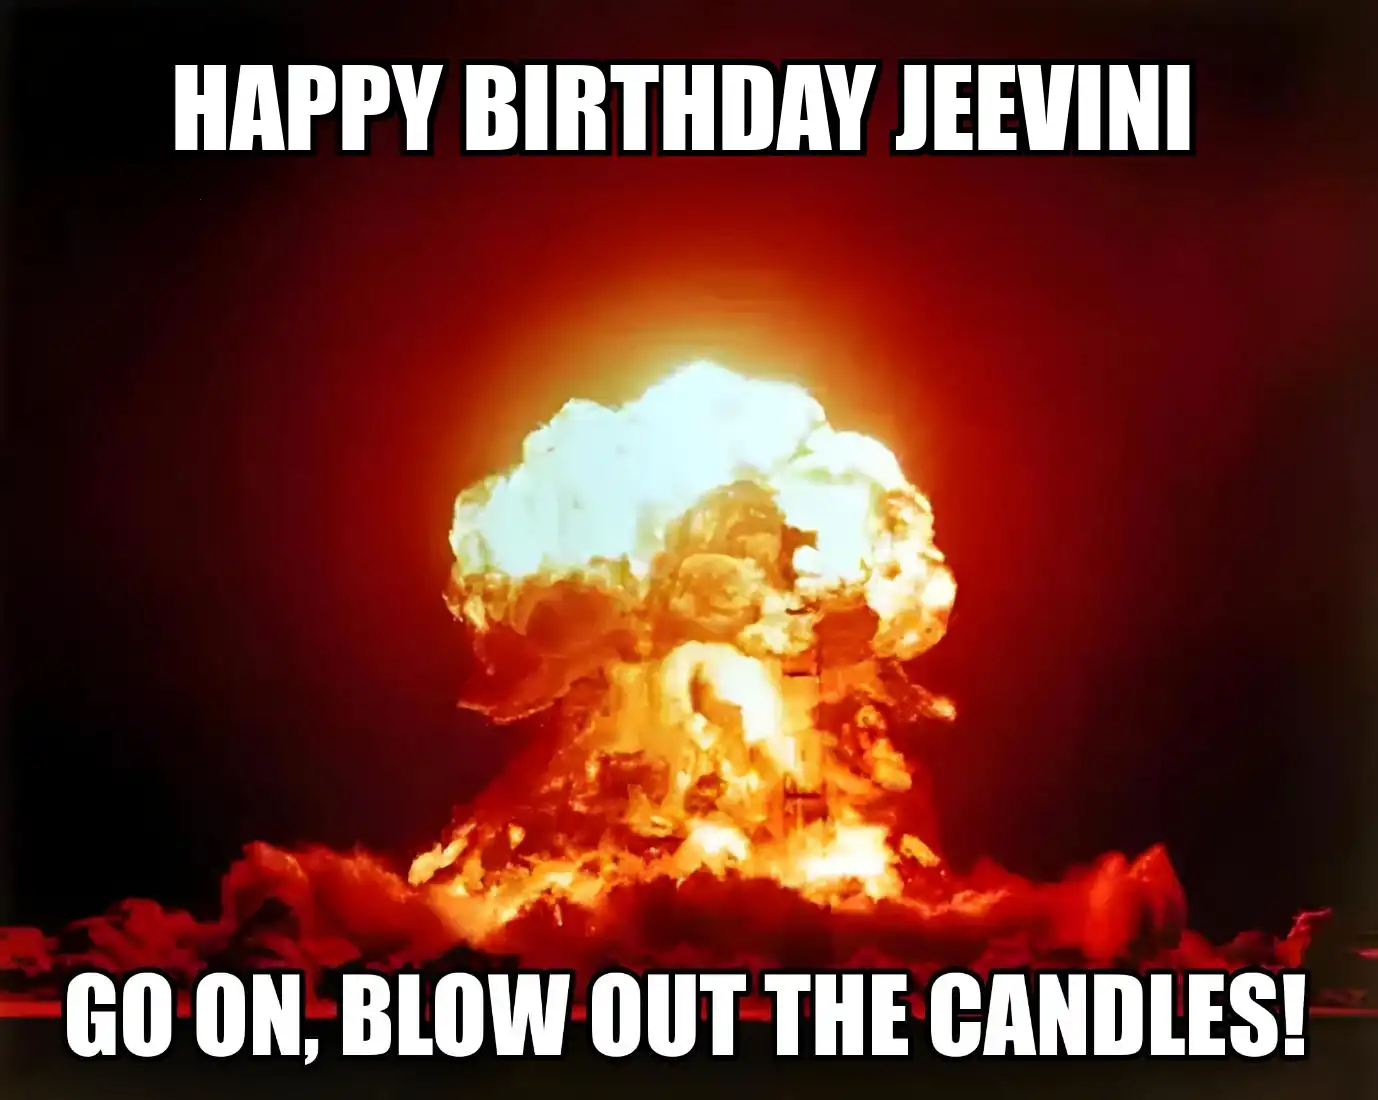 Happy Birthday Jeevini Go On Blow Out The Candles Meme